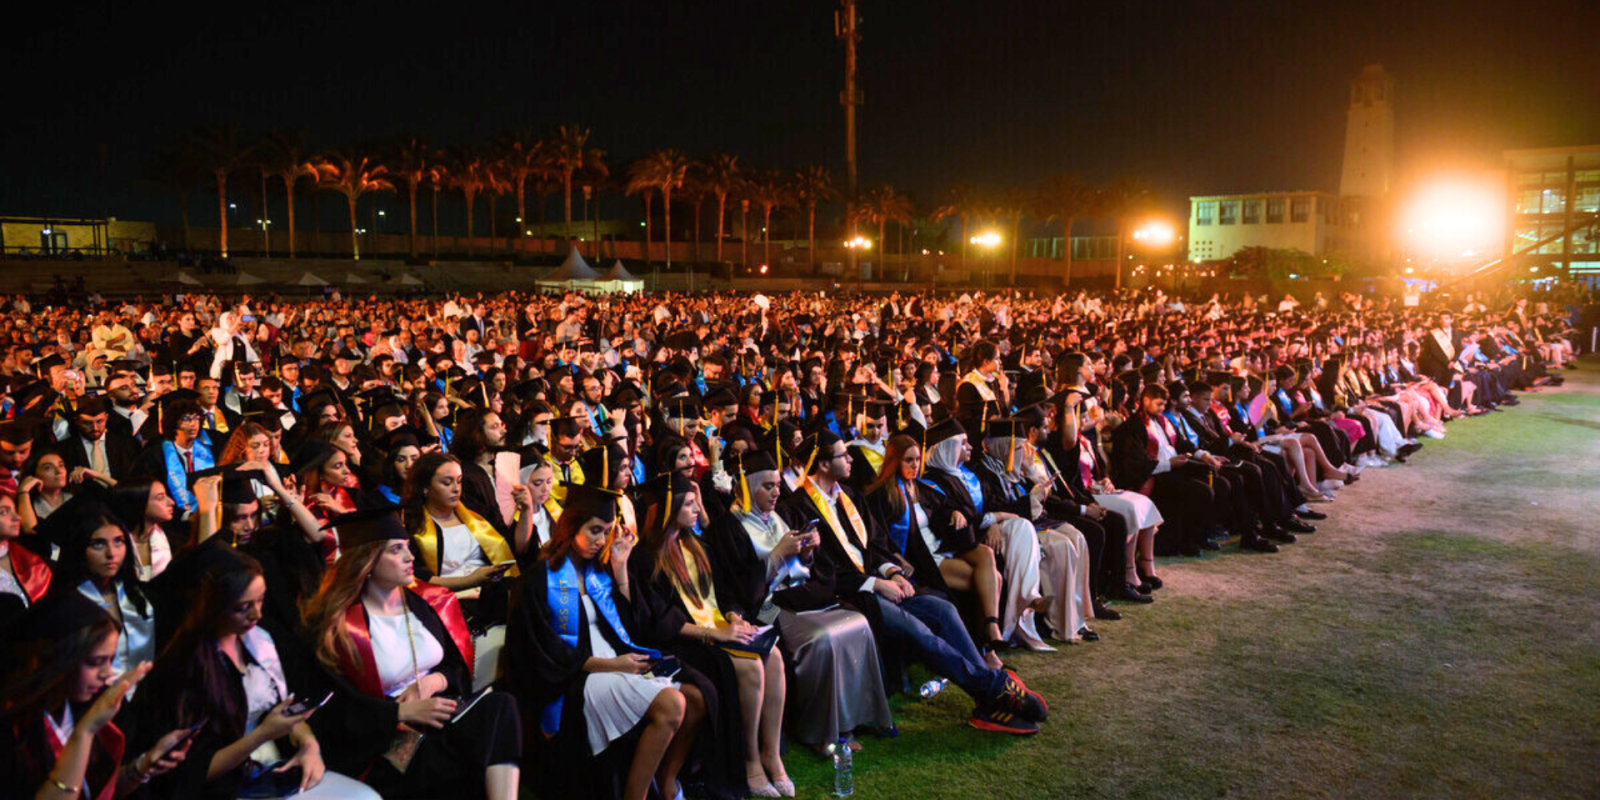 A large group of graduating students in gowns and caps sit together facing the stage